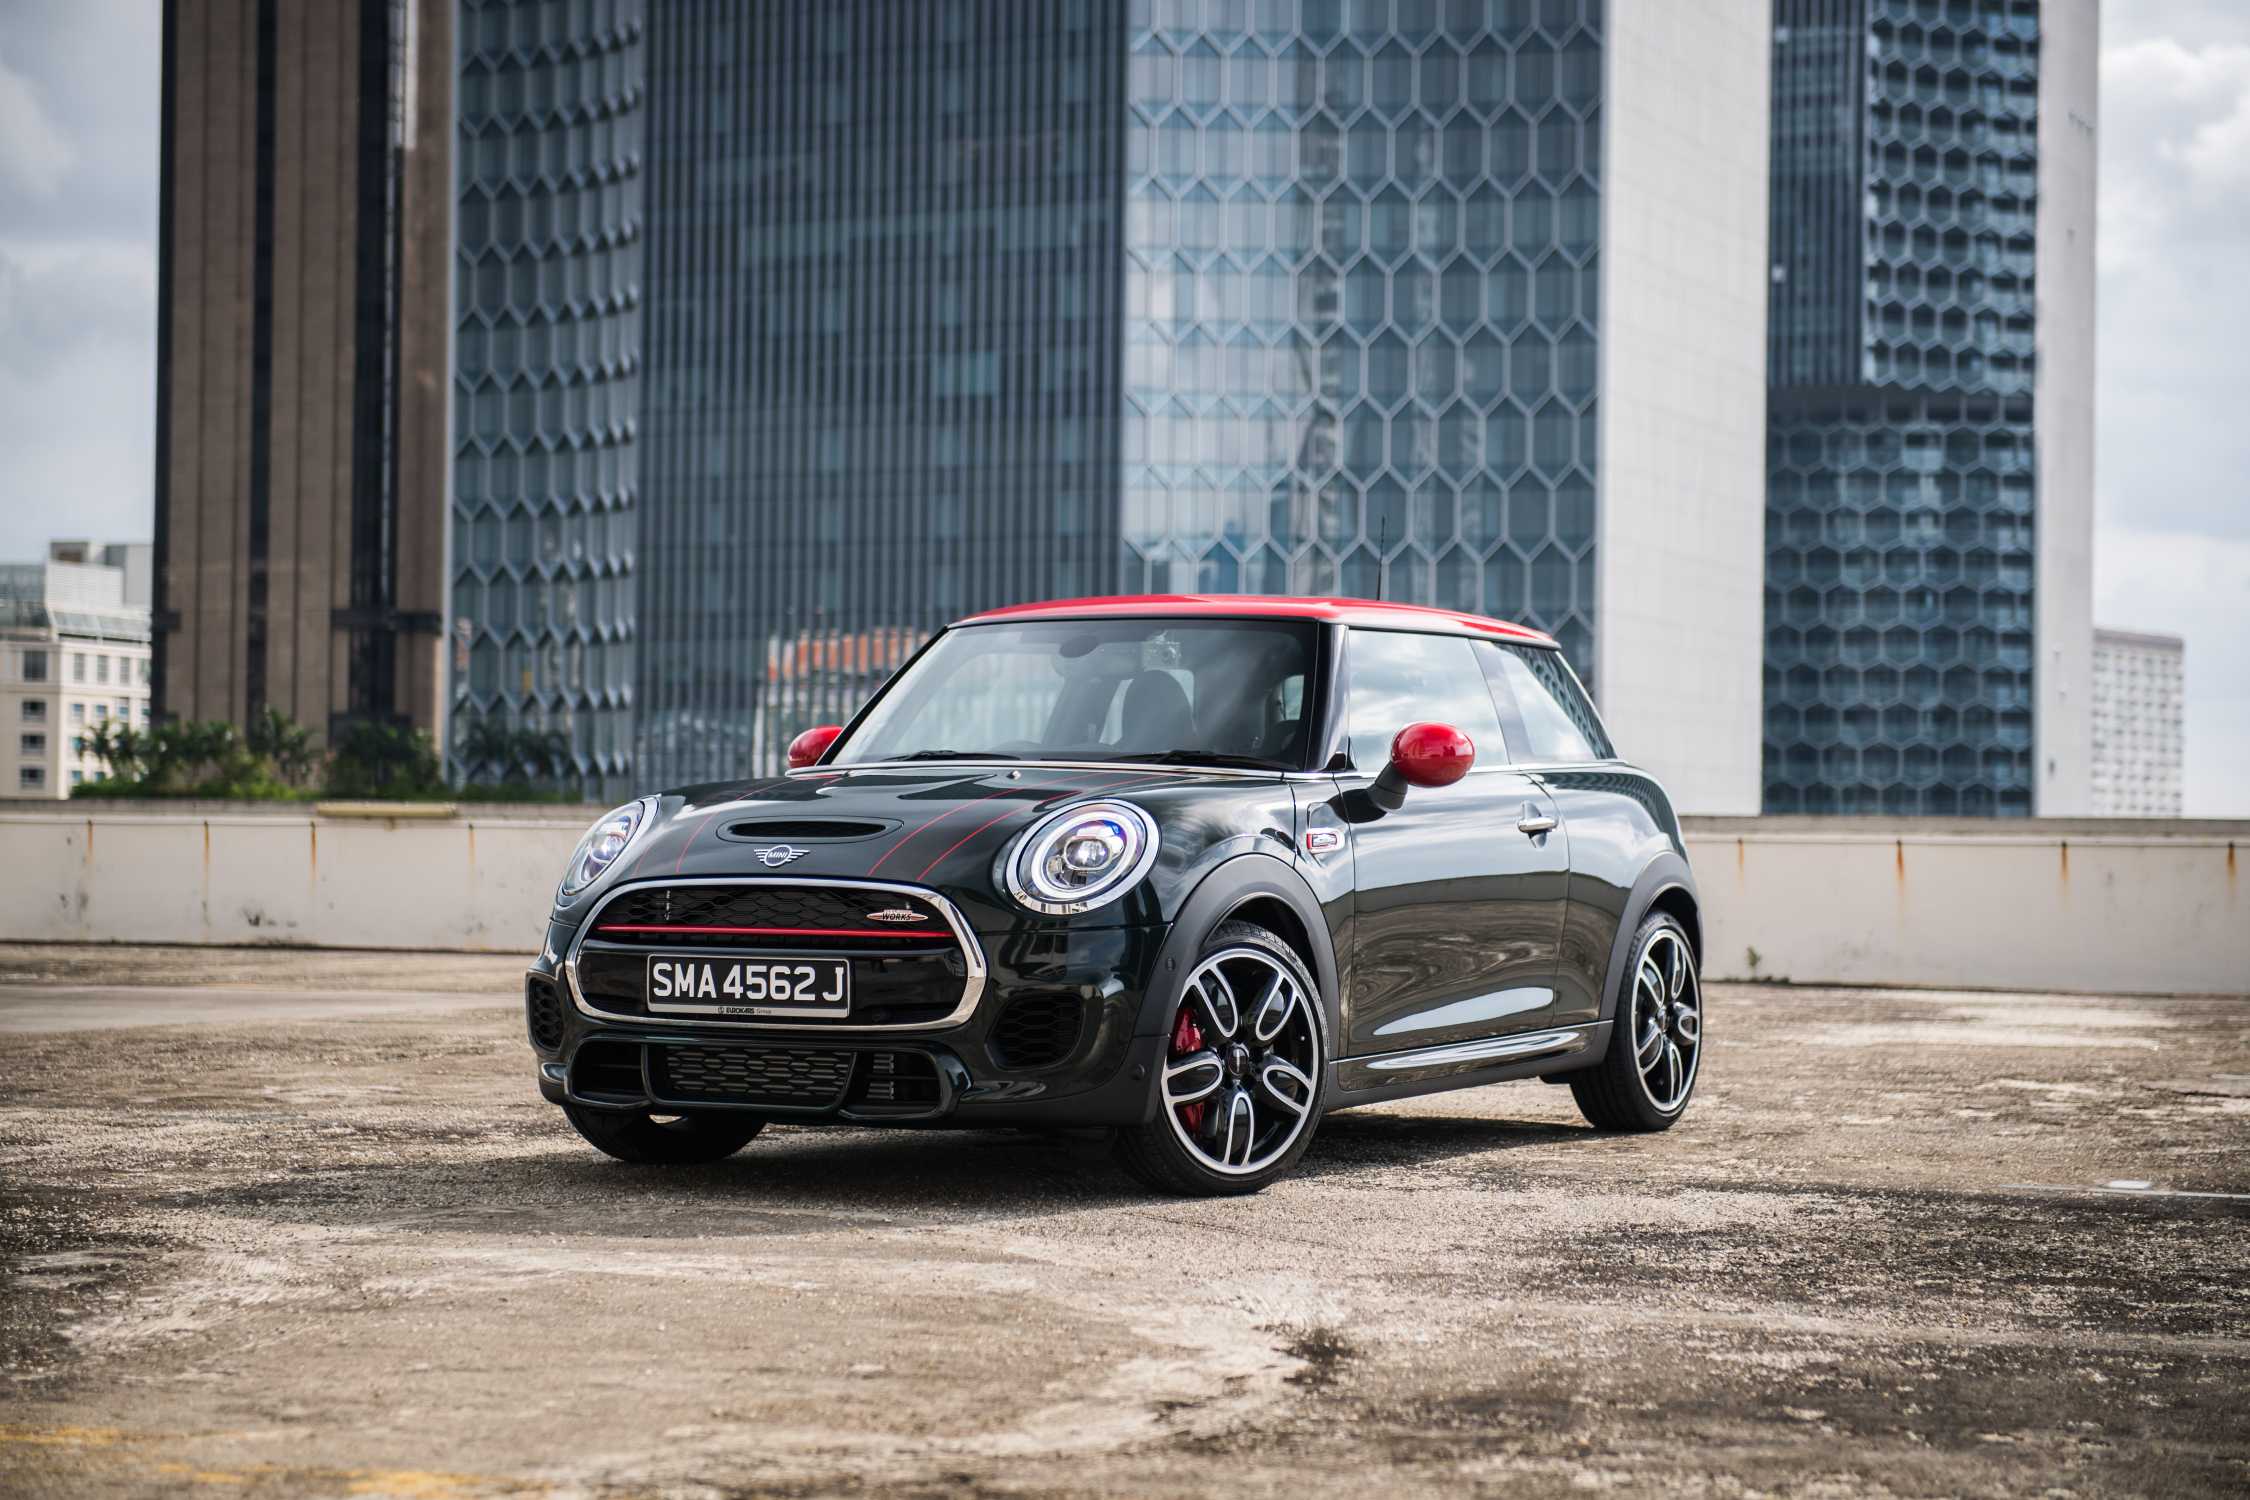 The new MINI John Cooper Works now available in Singapore.